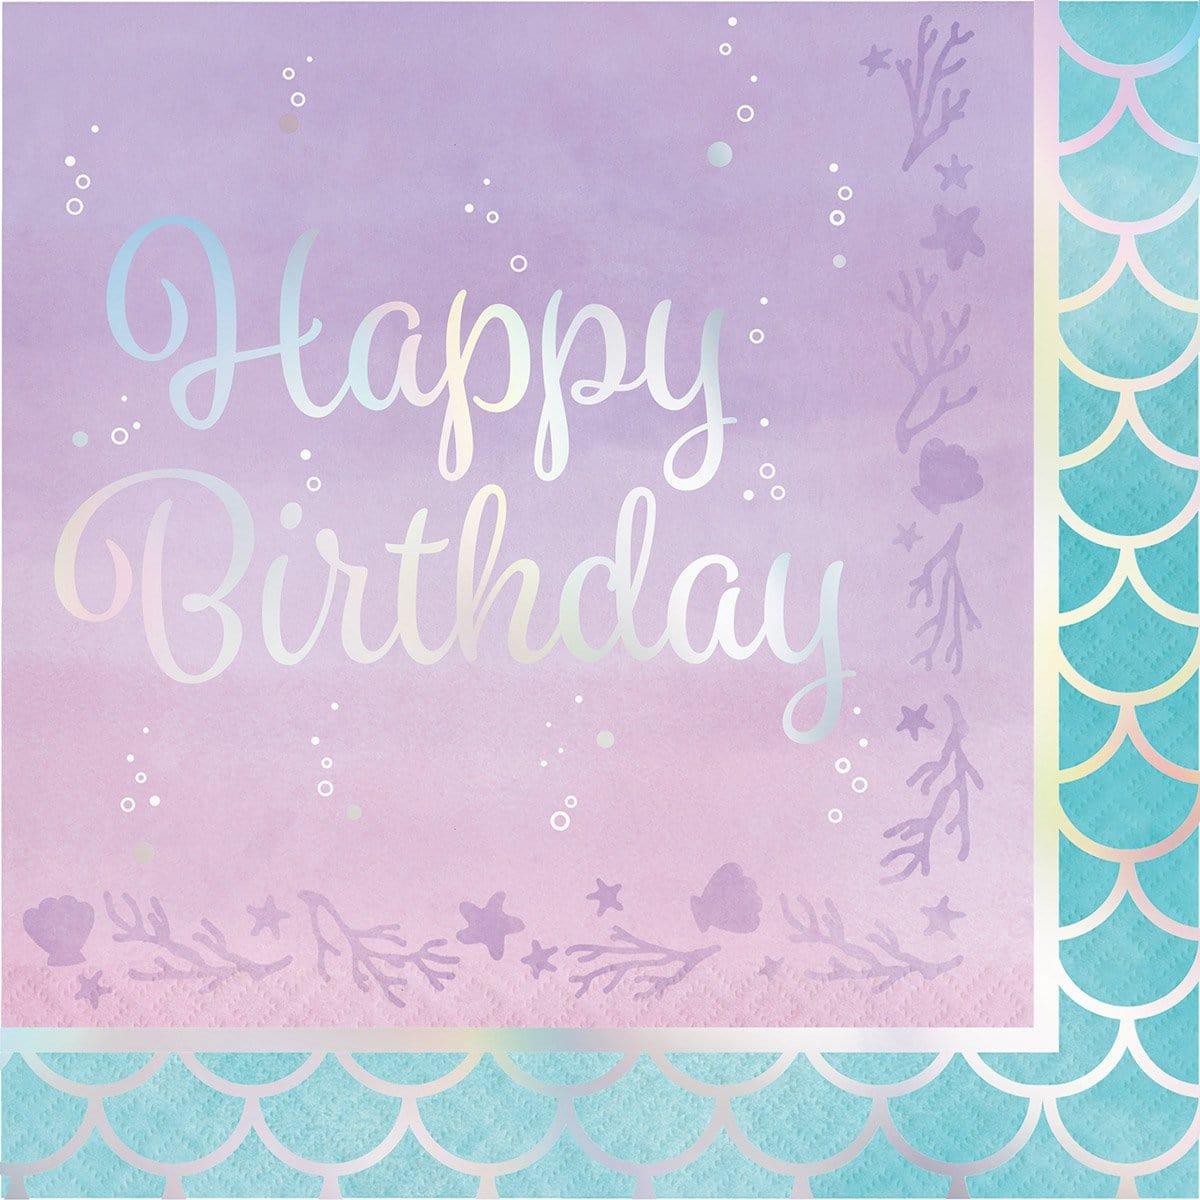 Buy Kids Birthday Mermaid Shine Happy Birthday lunch napkins, 16 per package sold at Party Expert